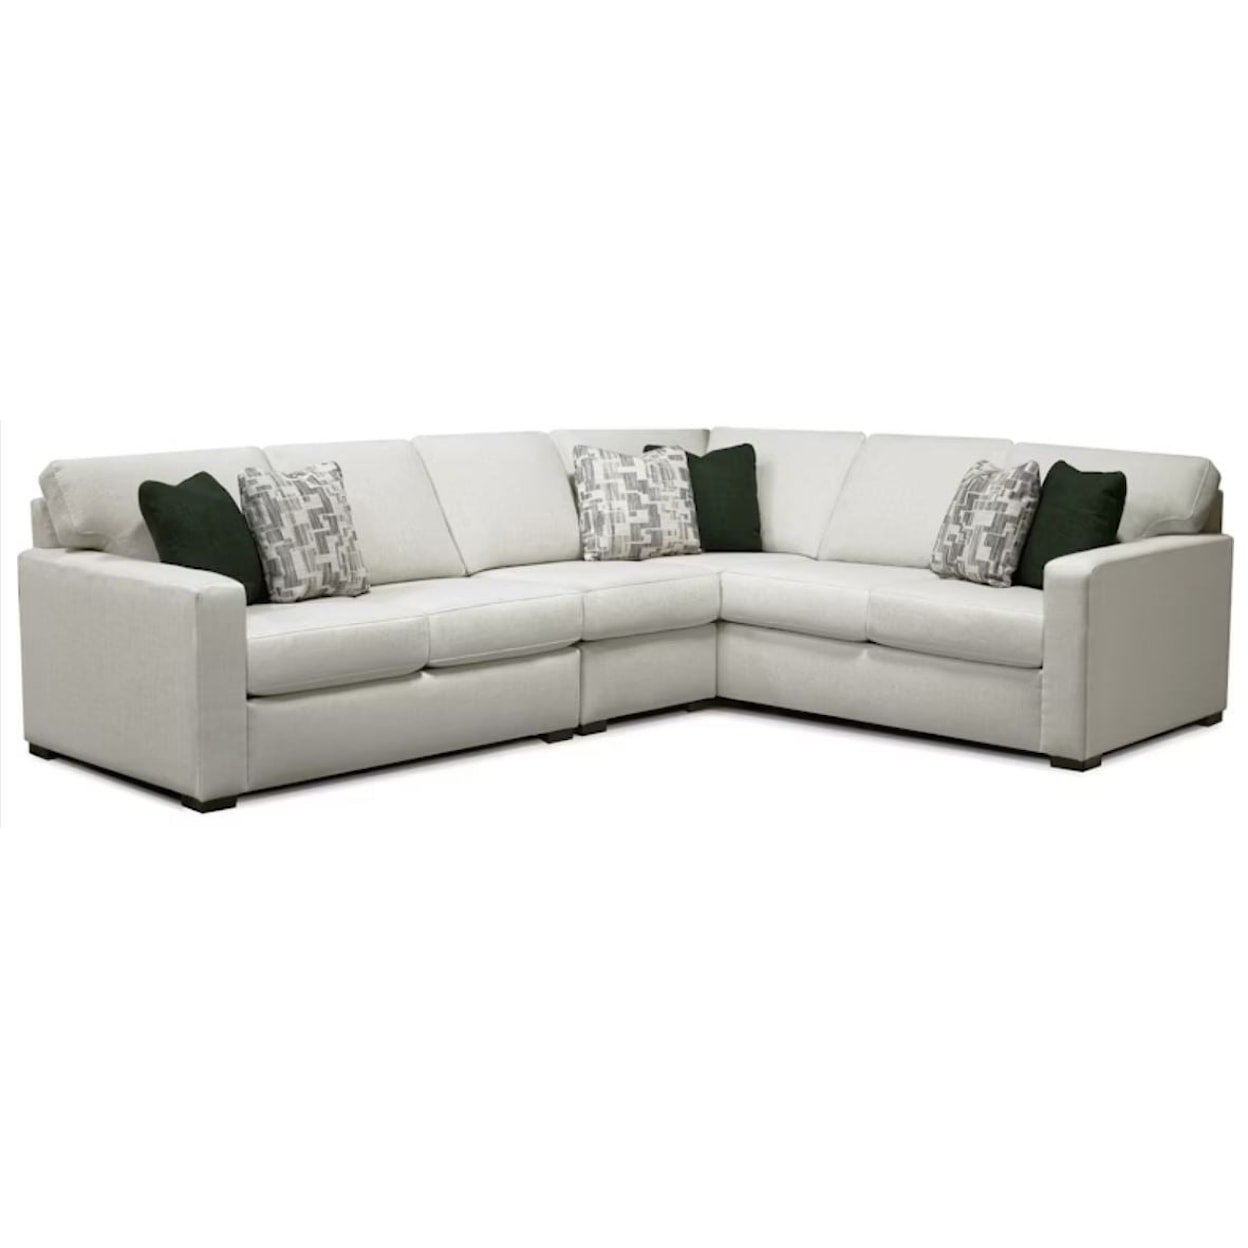 England Harlow Sectional